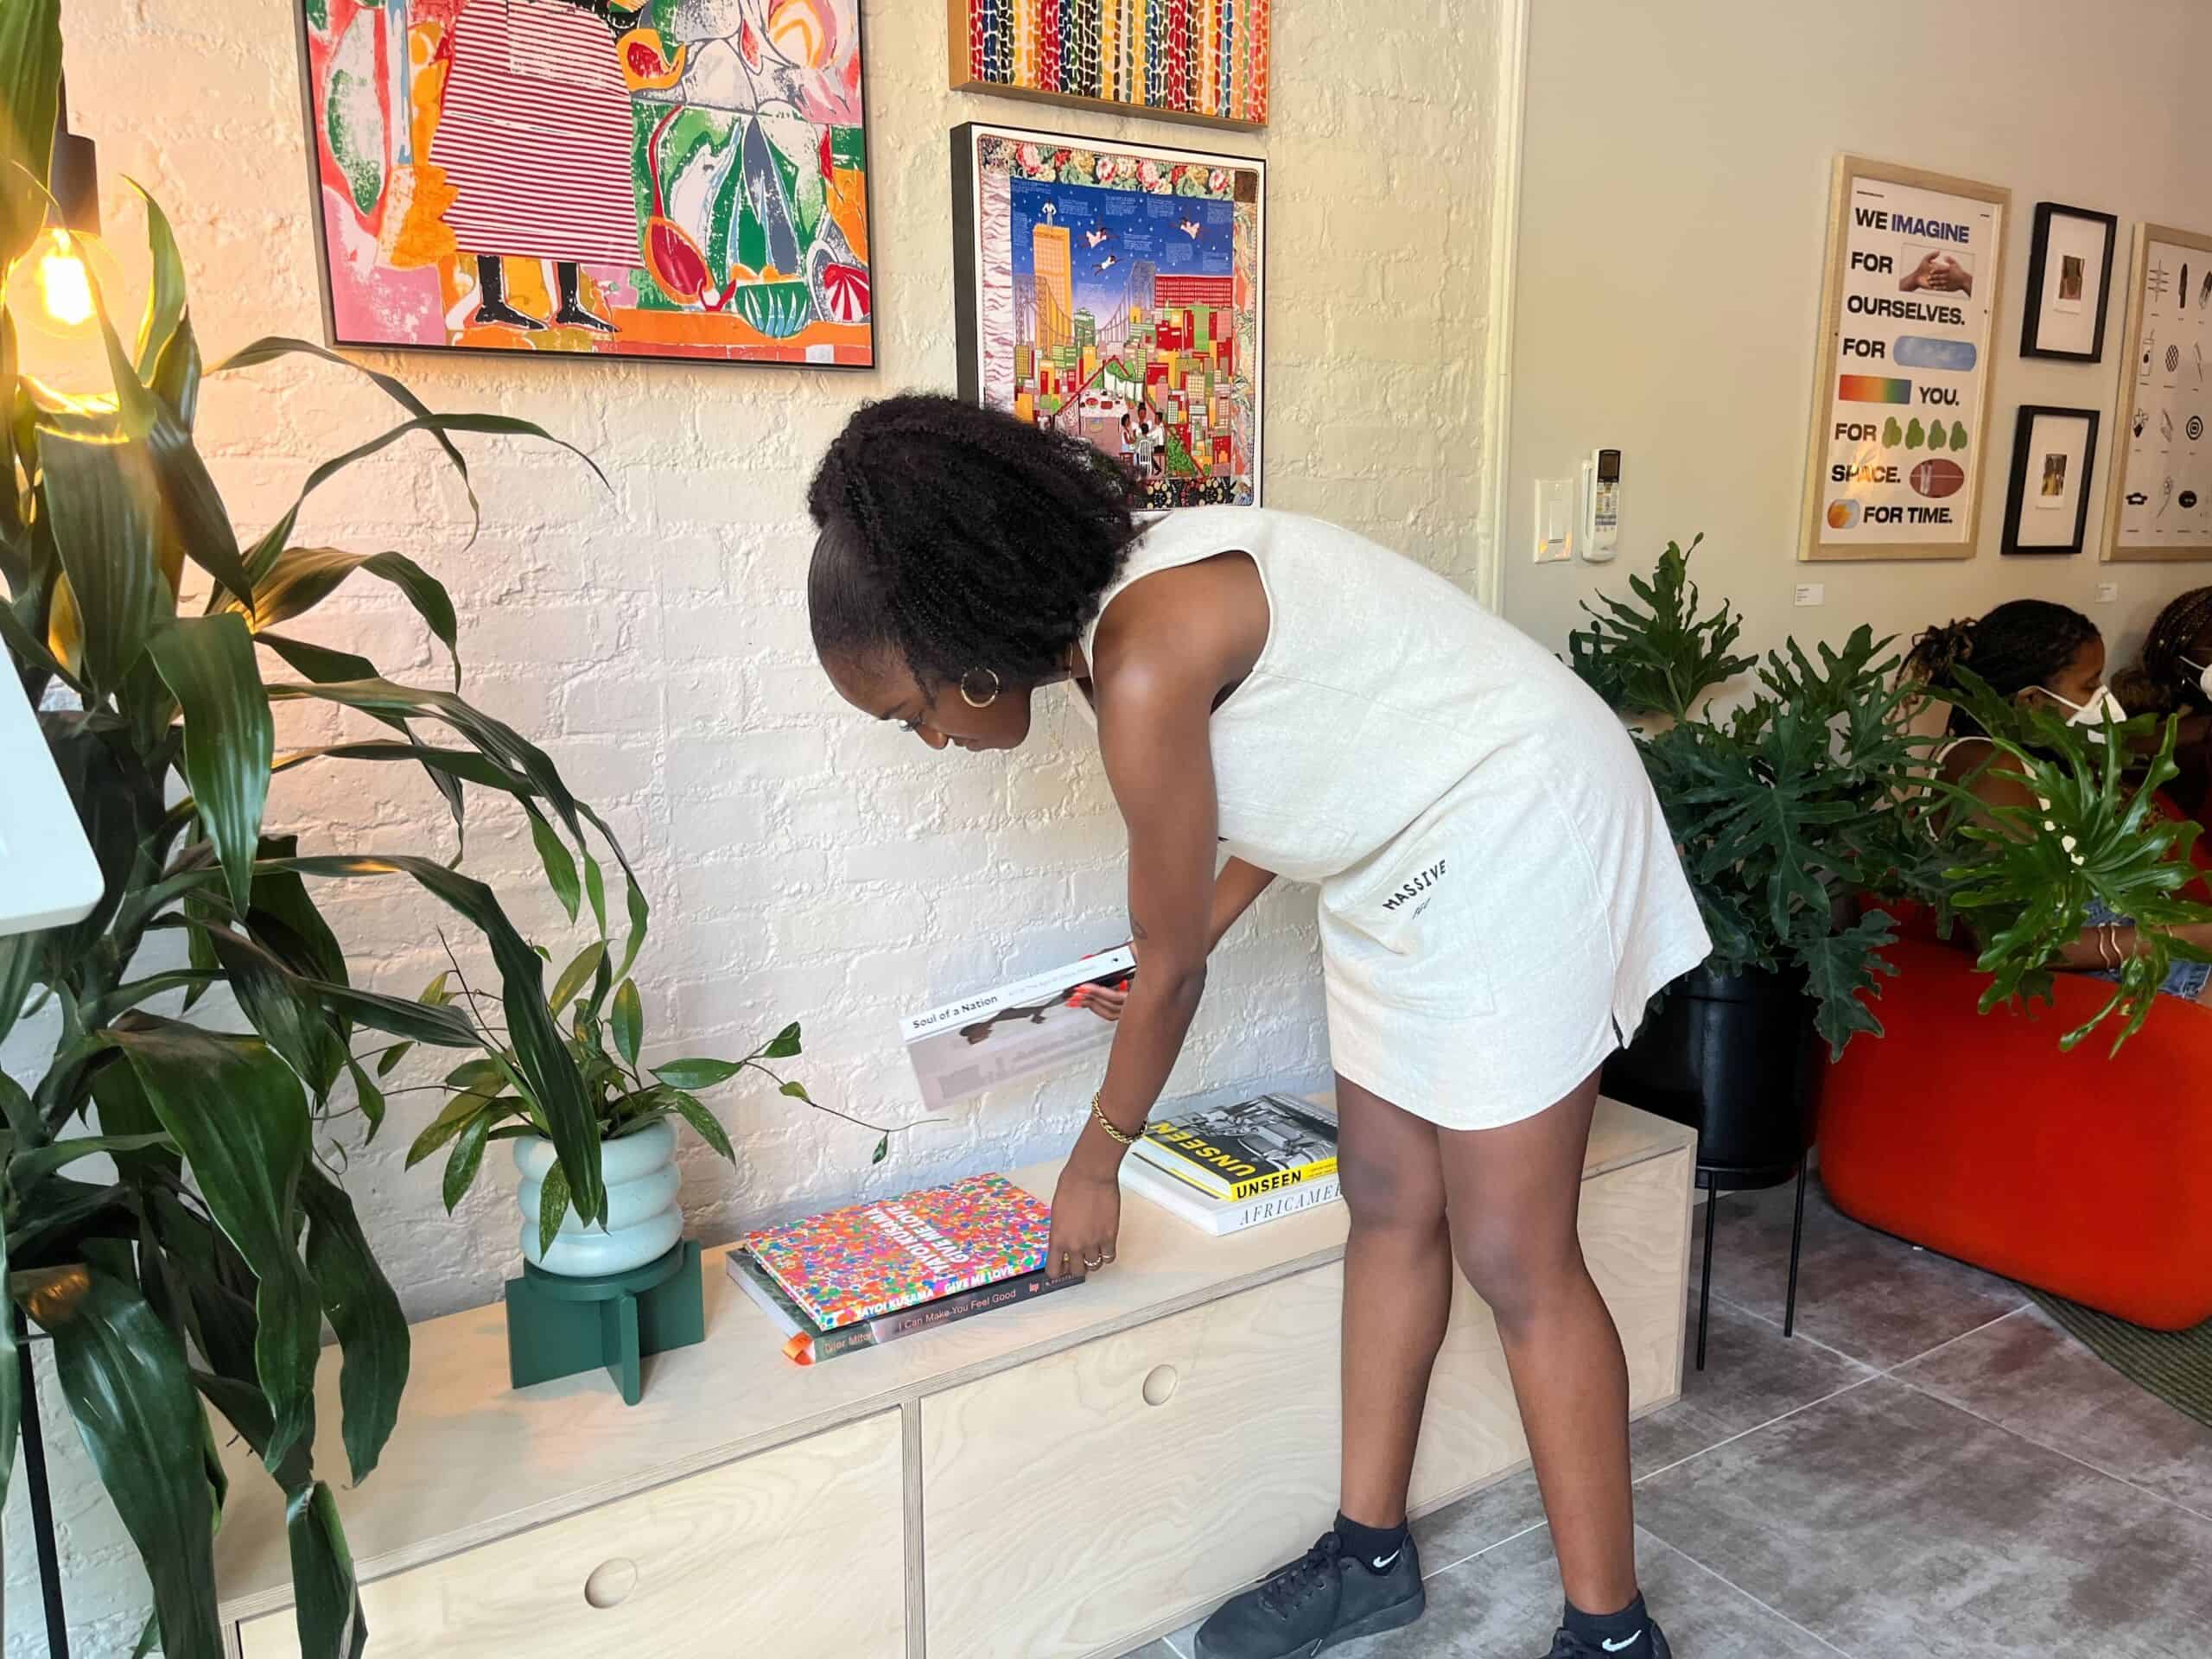 Naj Austin organizes books at the Somewhere Good co-working space in Bedstuy Brooklyn